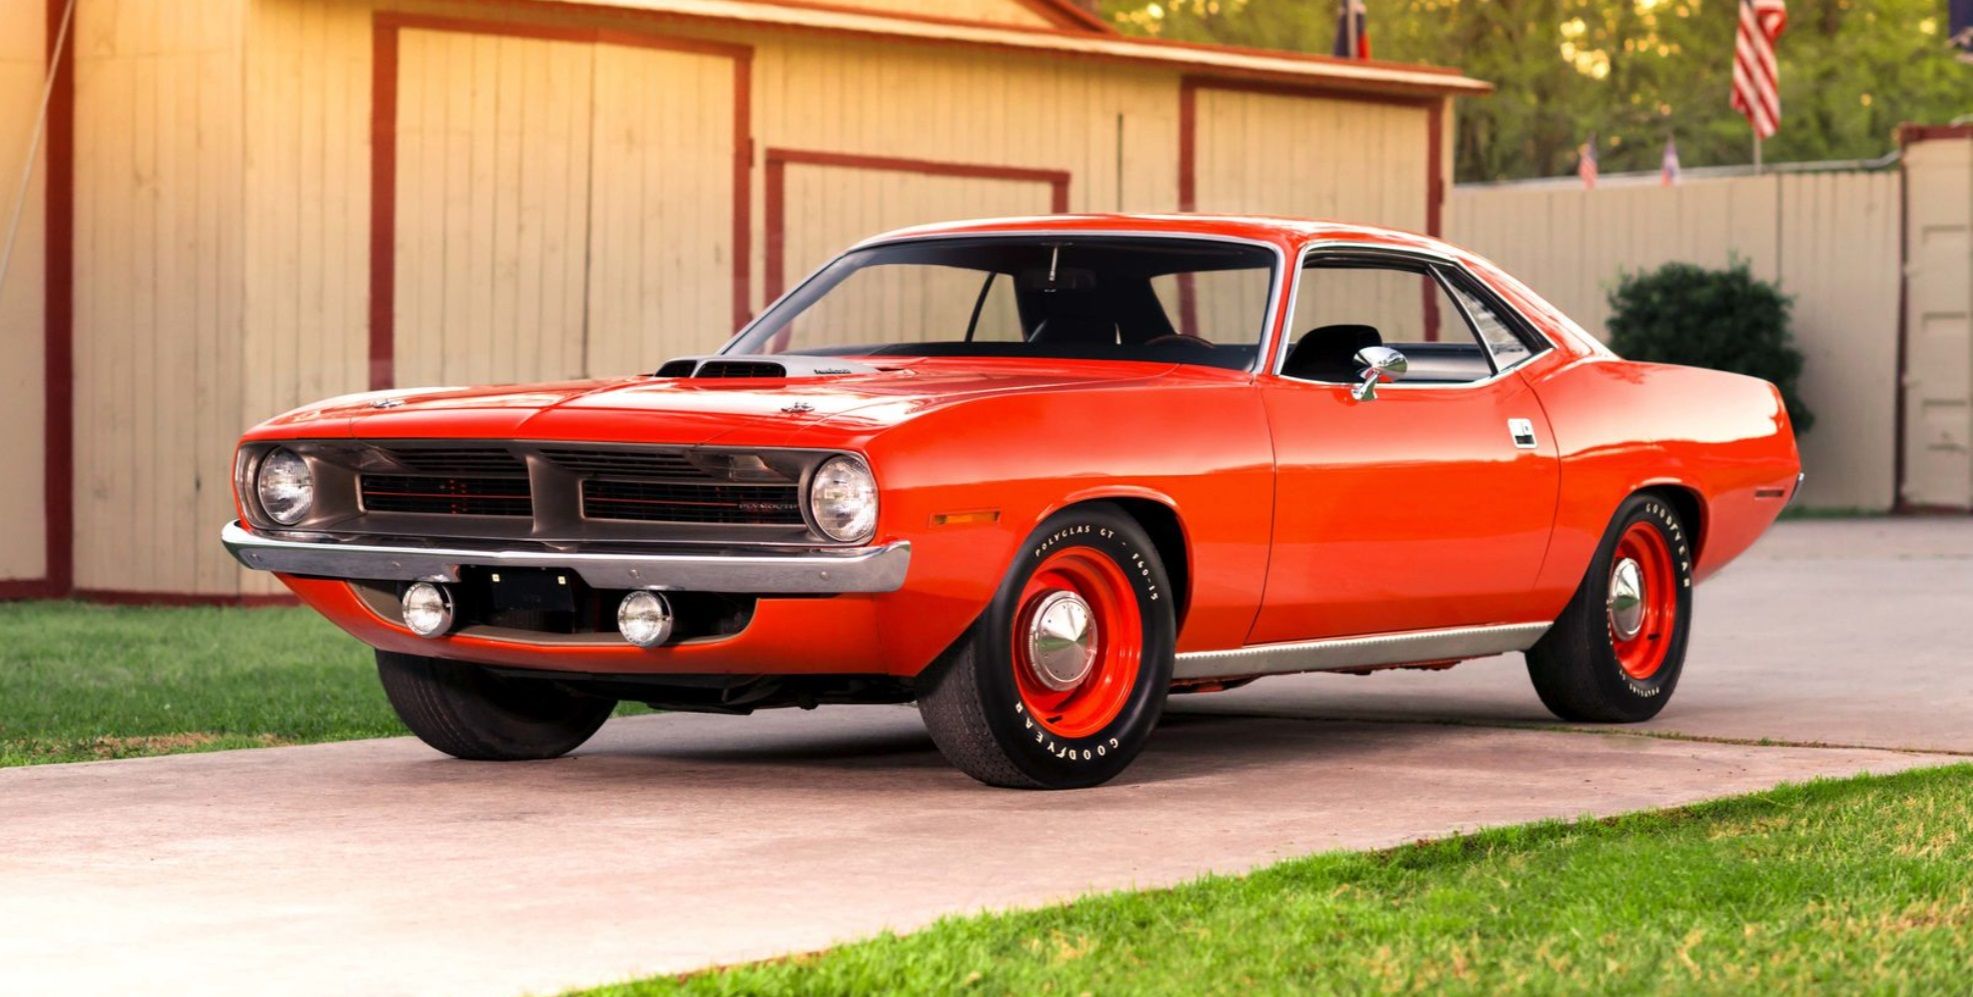 The 1970 Plymouth Hemi 'Cuda parked on a driveway.